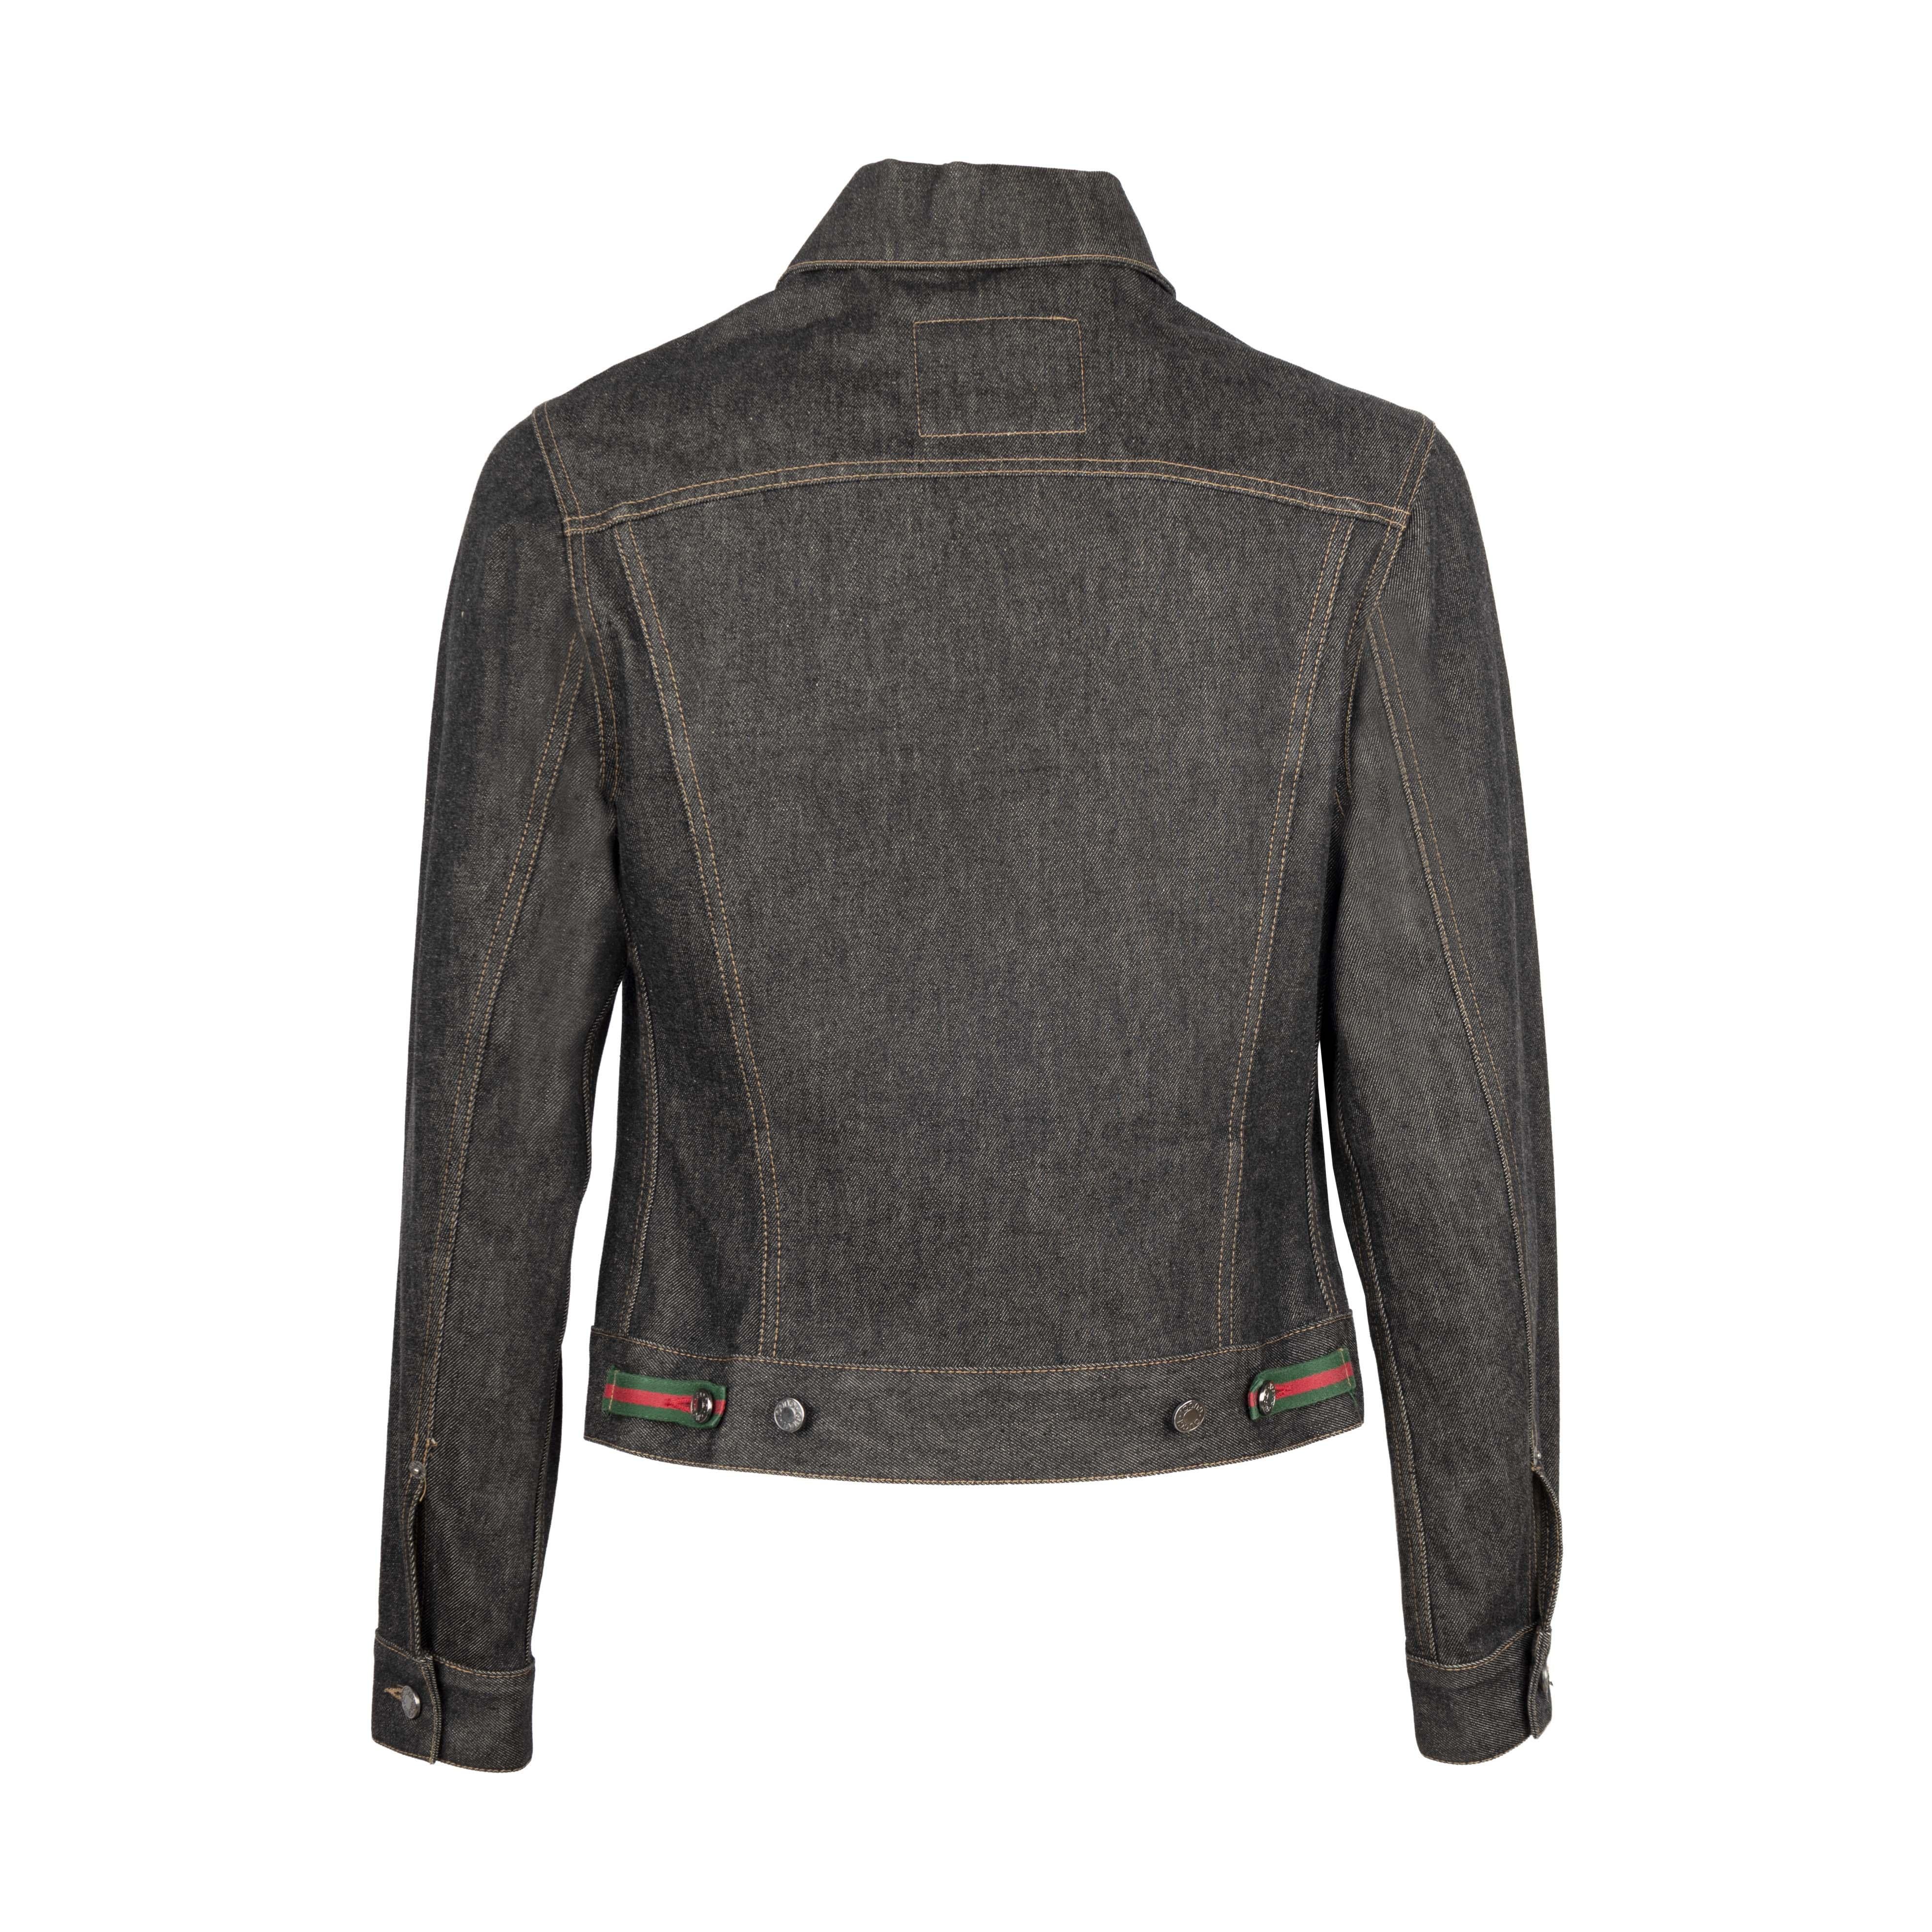 Gucci black denim jacket from the iconic Tom Ford era in the early 2000s, known for revitalizing the brand with his eye-catching ready-to-wear designs. Embellished with the maison's classic red and green details. Long sleeve, button